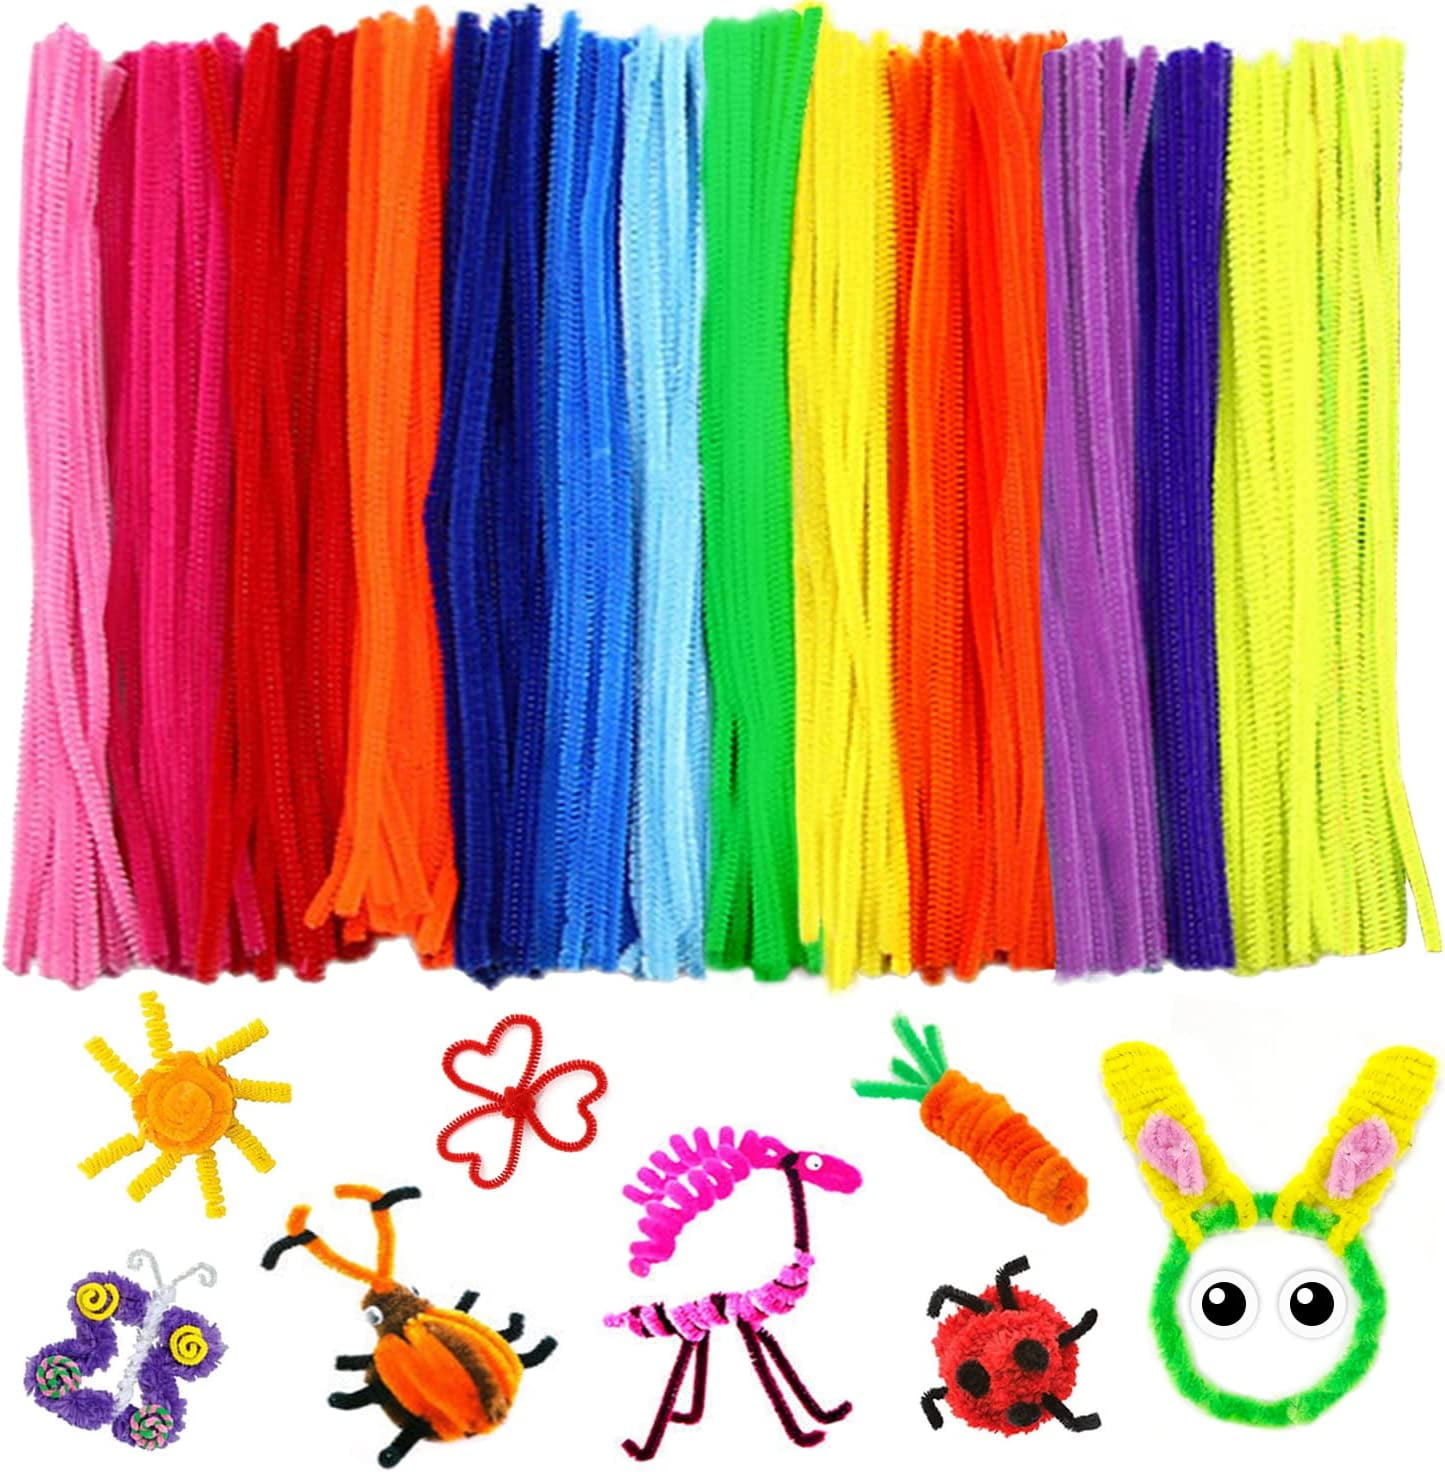 Multicolor Chenille Stems Pipe Cleaners, 6mm X 12 Inch, 100 Pack Neutrals  Brown Tan Black White Felting Art Craft Animal Cousin DIY -  Israel